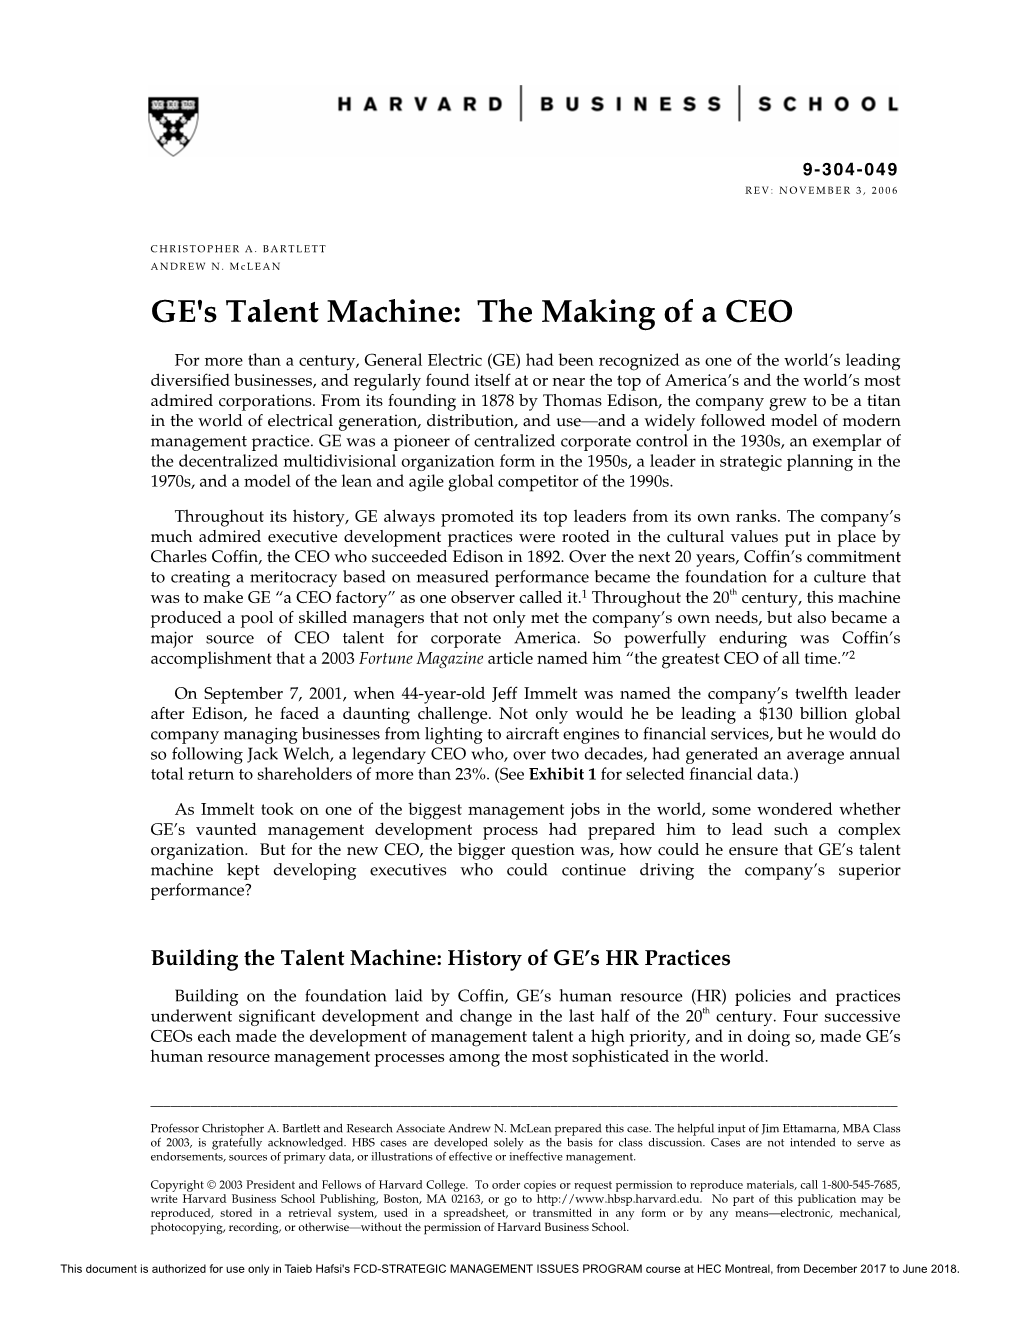 GE's Talent Machine: the Making of a CEO